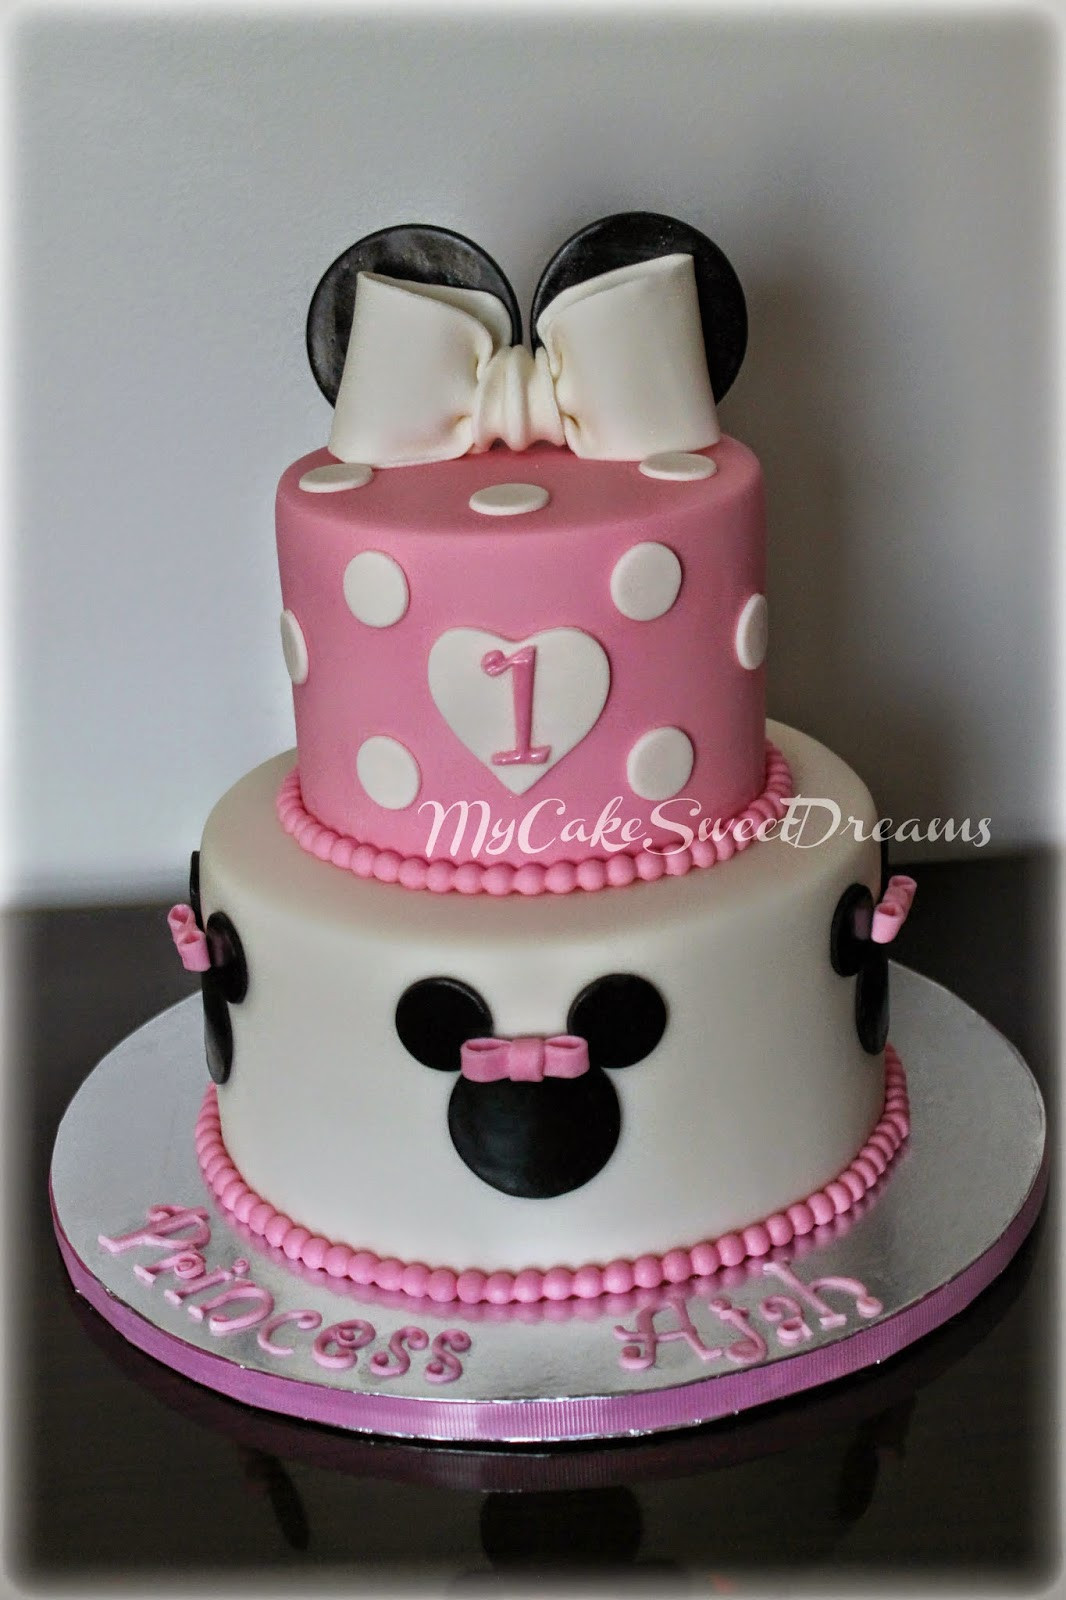 Minnie Mouse 1st Birthday Cakes
 My Cake Sweet Dreams Minnie Mouse 1st Birthday Cake